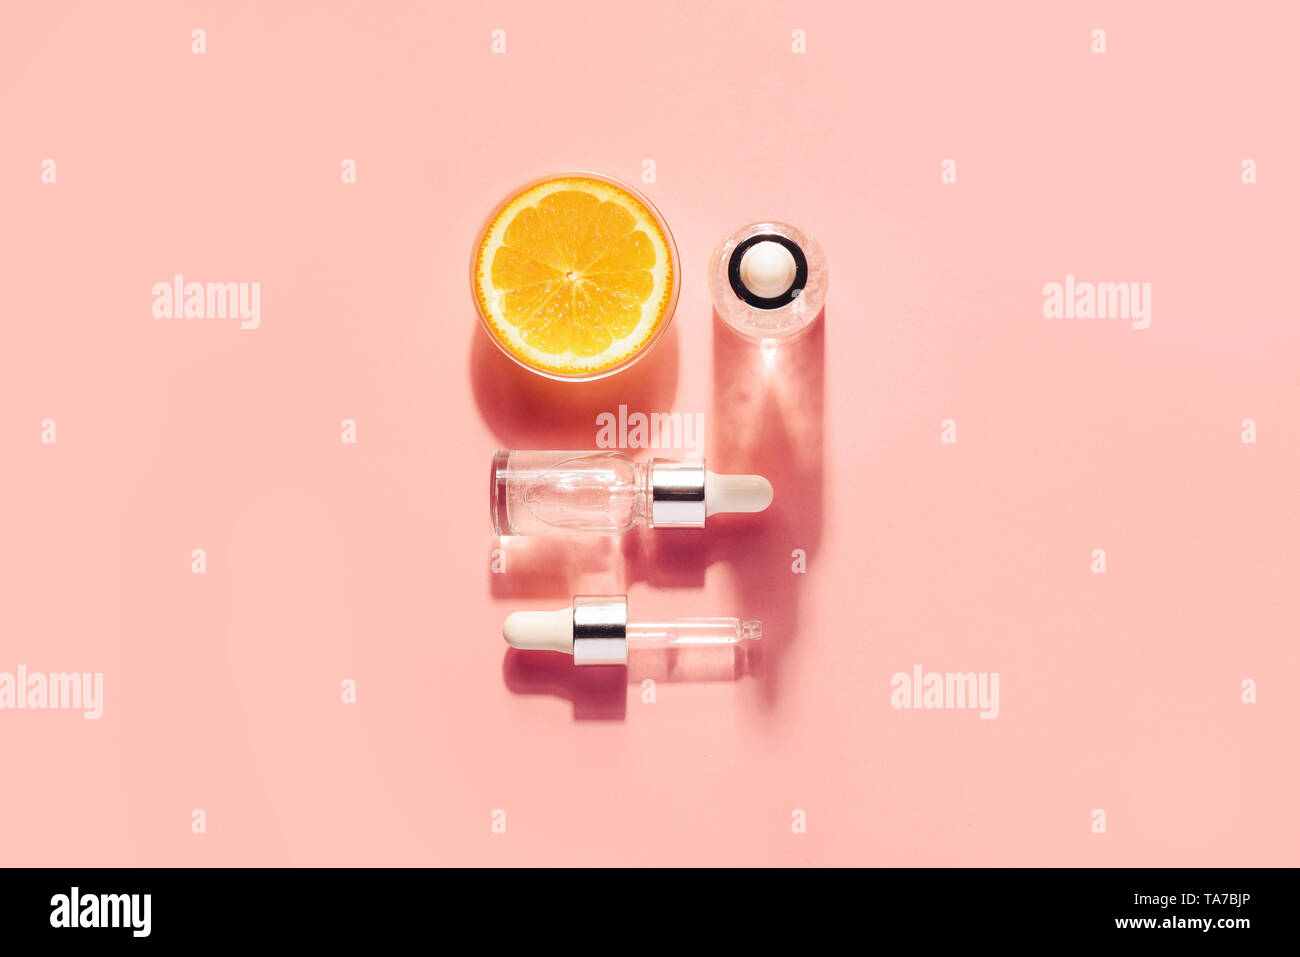 Serum with vitamin C, concept design. Beauty therapy, body care. Flat lay. Stock Photo